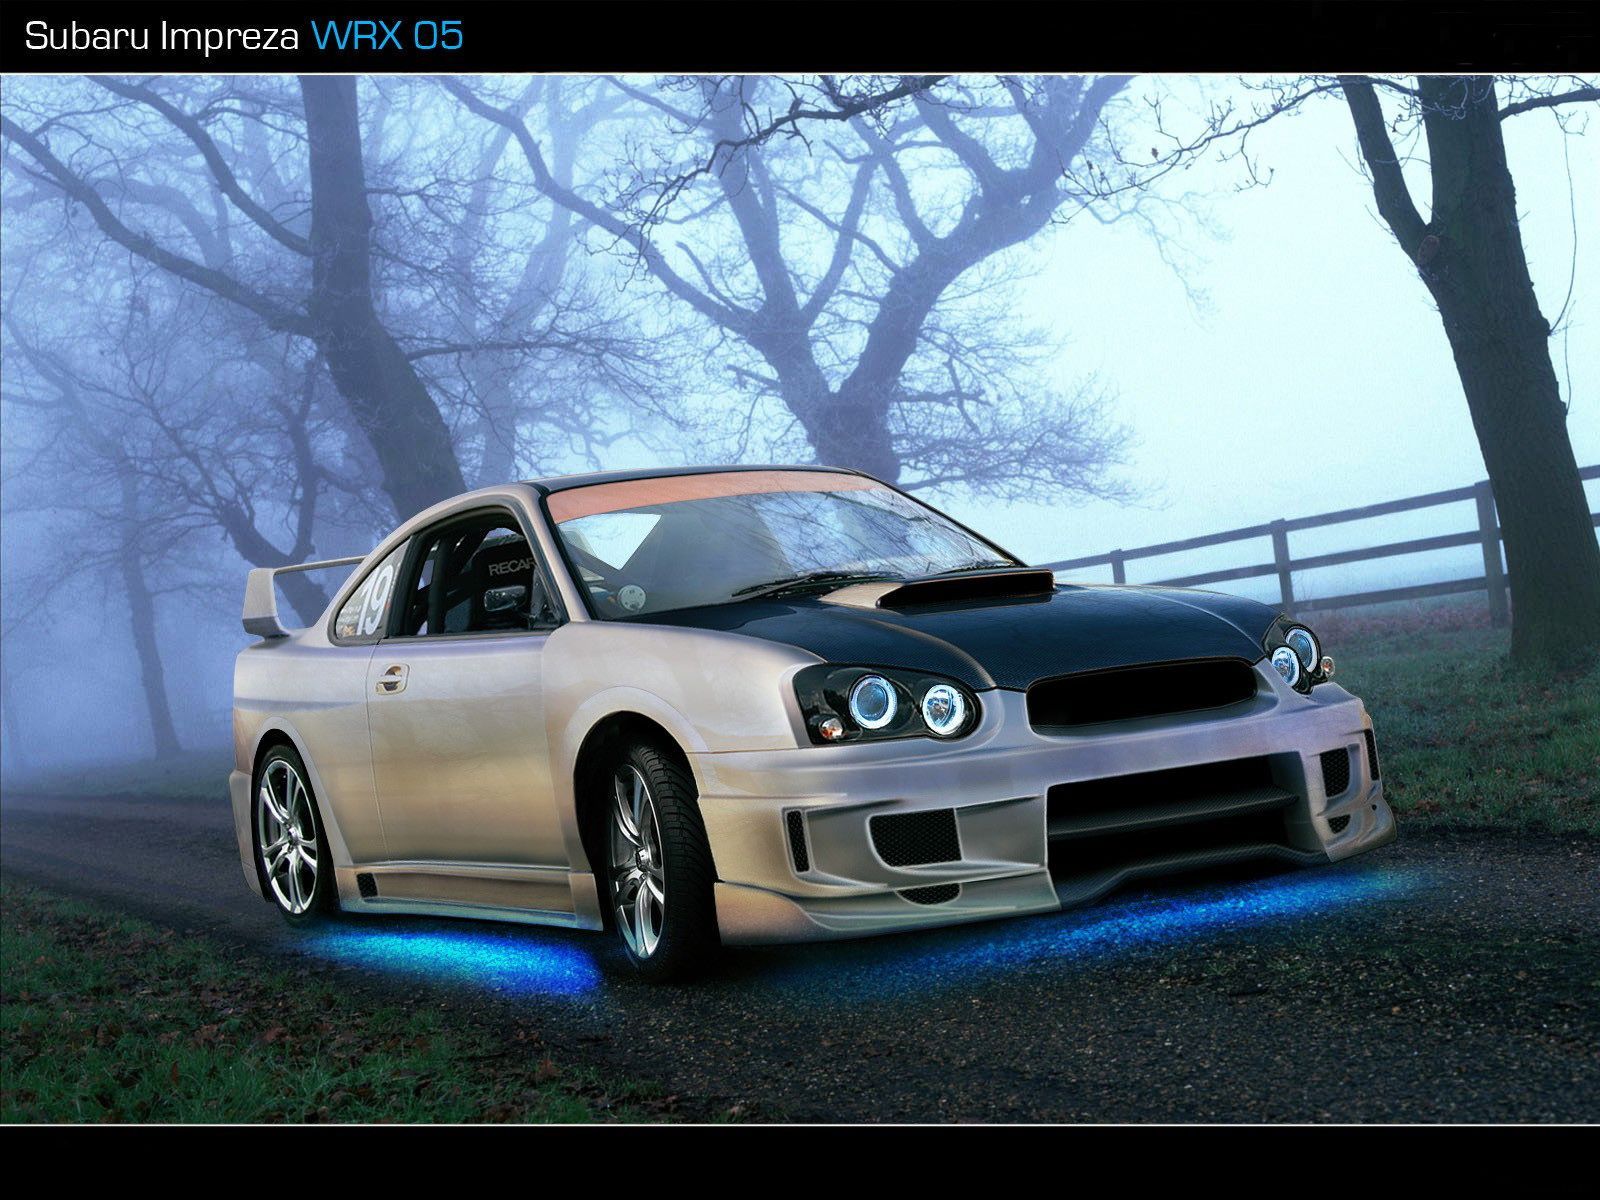 Subaru Impreza wallpapers and images - wallpapers, pictures, photos